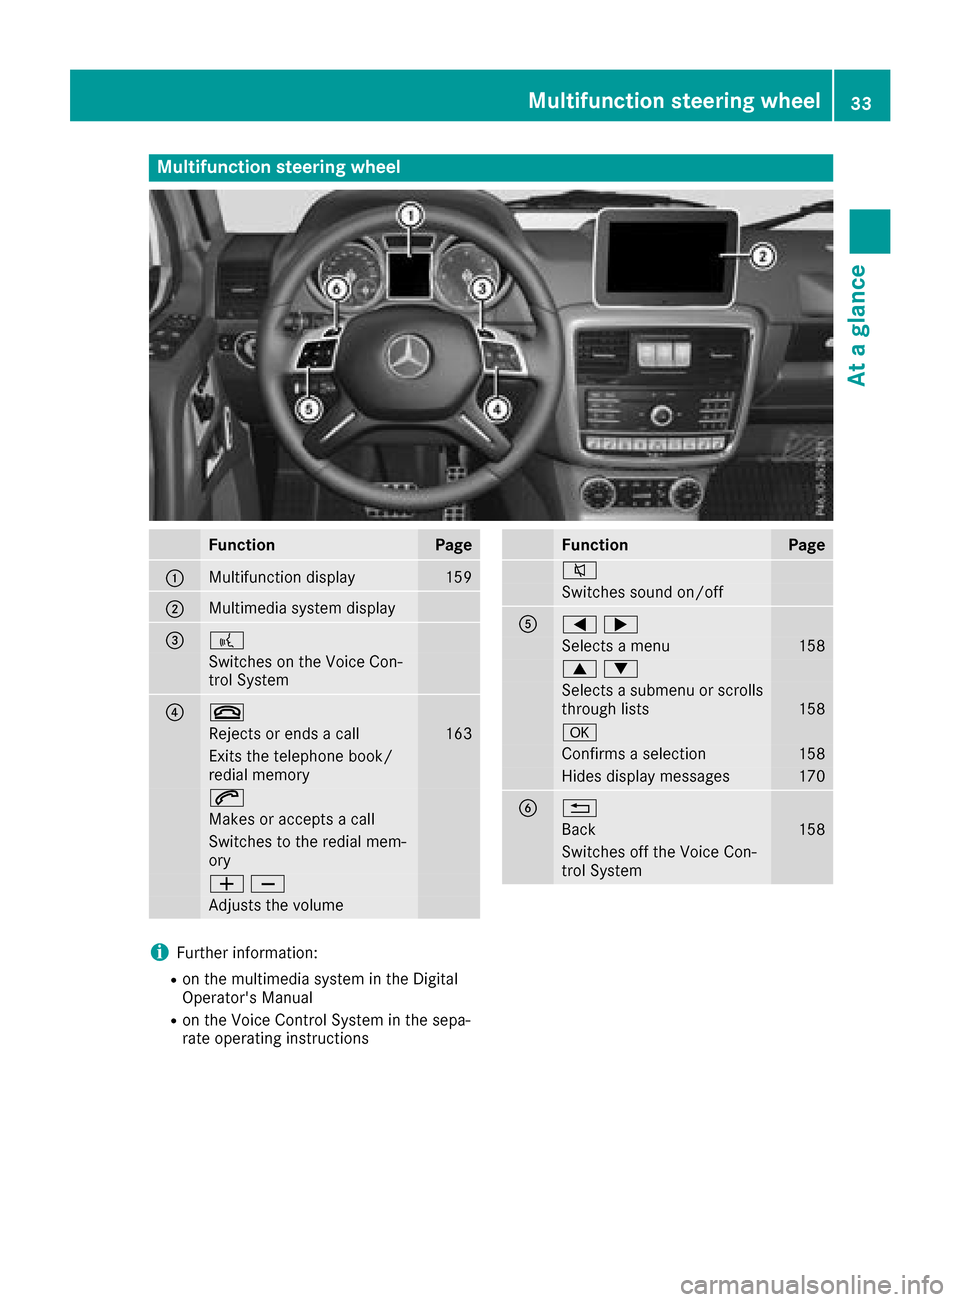 MERCEDES-BENZ G-Class 2017 W463 Owners Guide Multifunction steering wheel
FunctionPage
:Multifunction display159
;Multimediasystem display
=?
Switches on the Voice Con-
trol System
?~
Rejects or ends acall163
Exits the telephone book/
redial mem